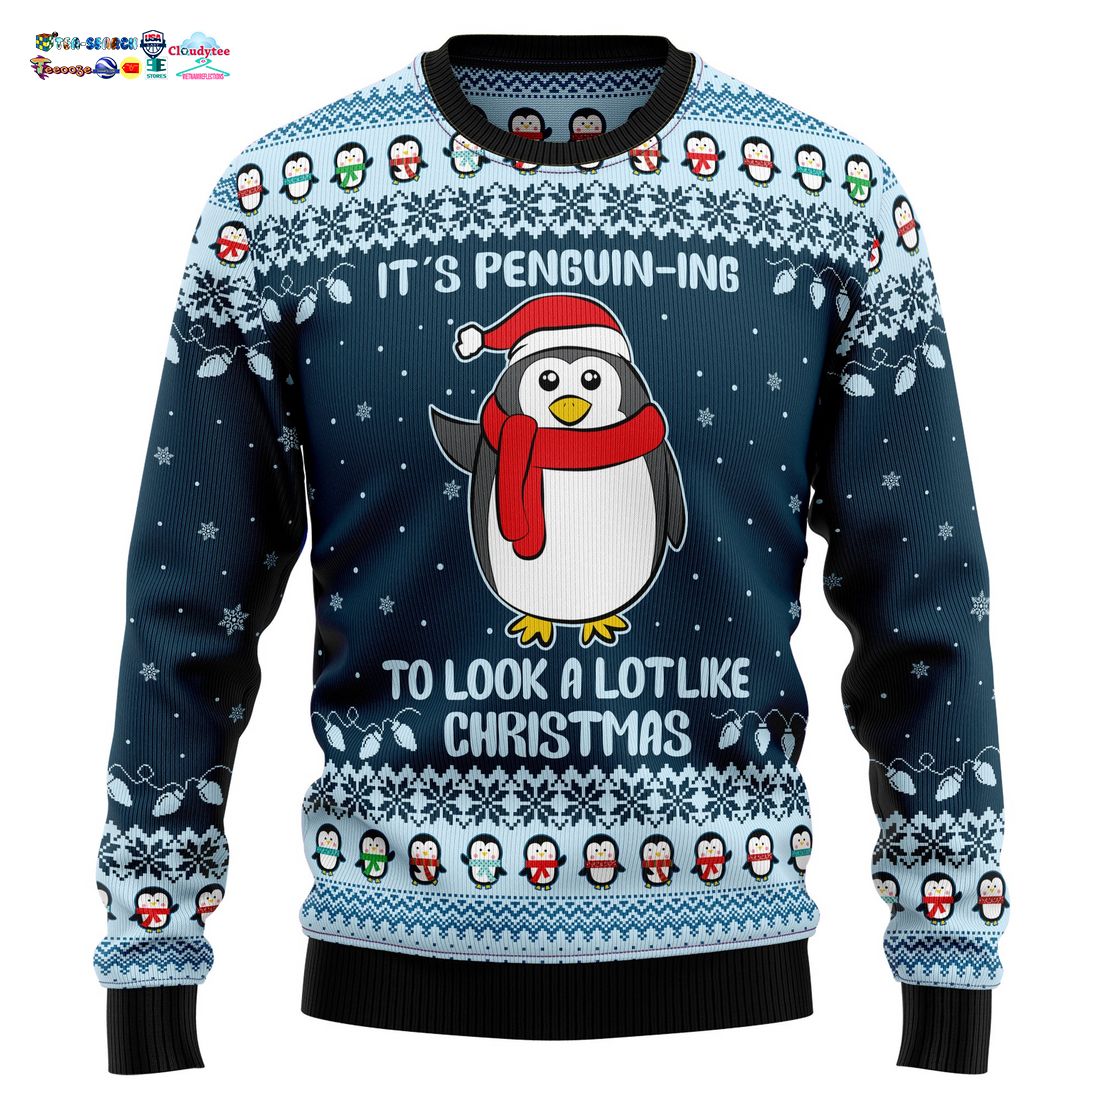 its-penguin-ing-to-look-a-lot-like-christmas-ugly-christmas-sweater-1-Y67Lt.jpg